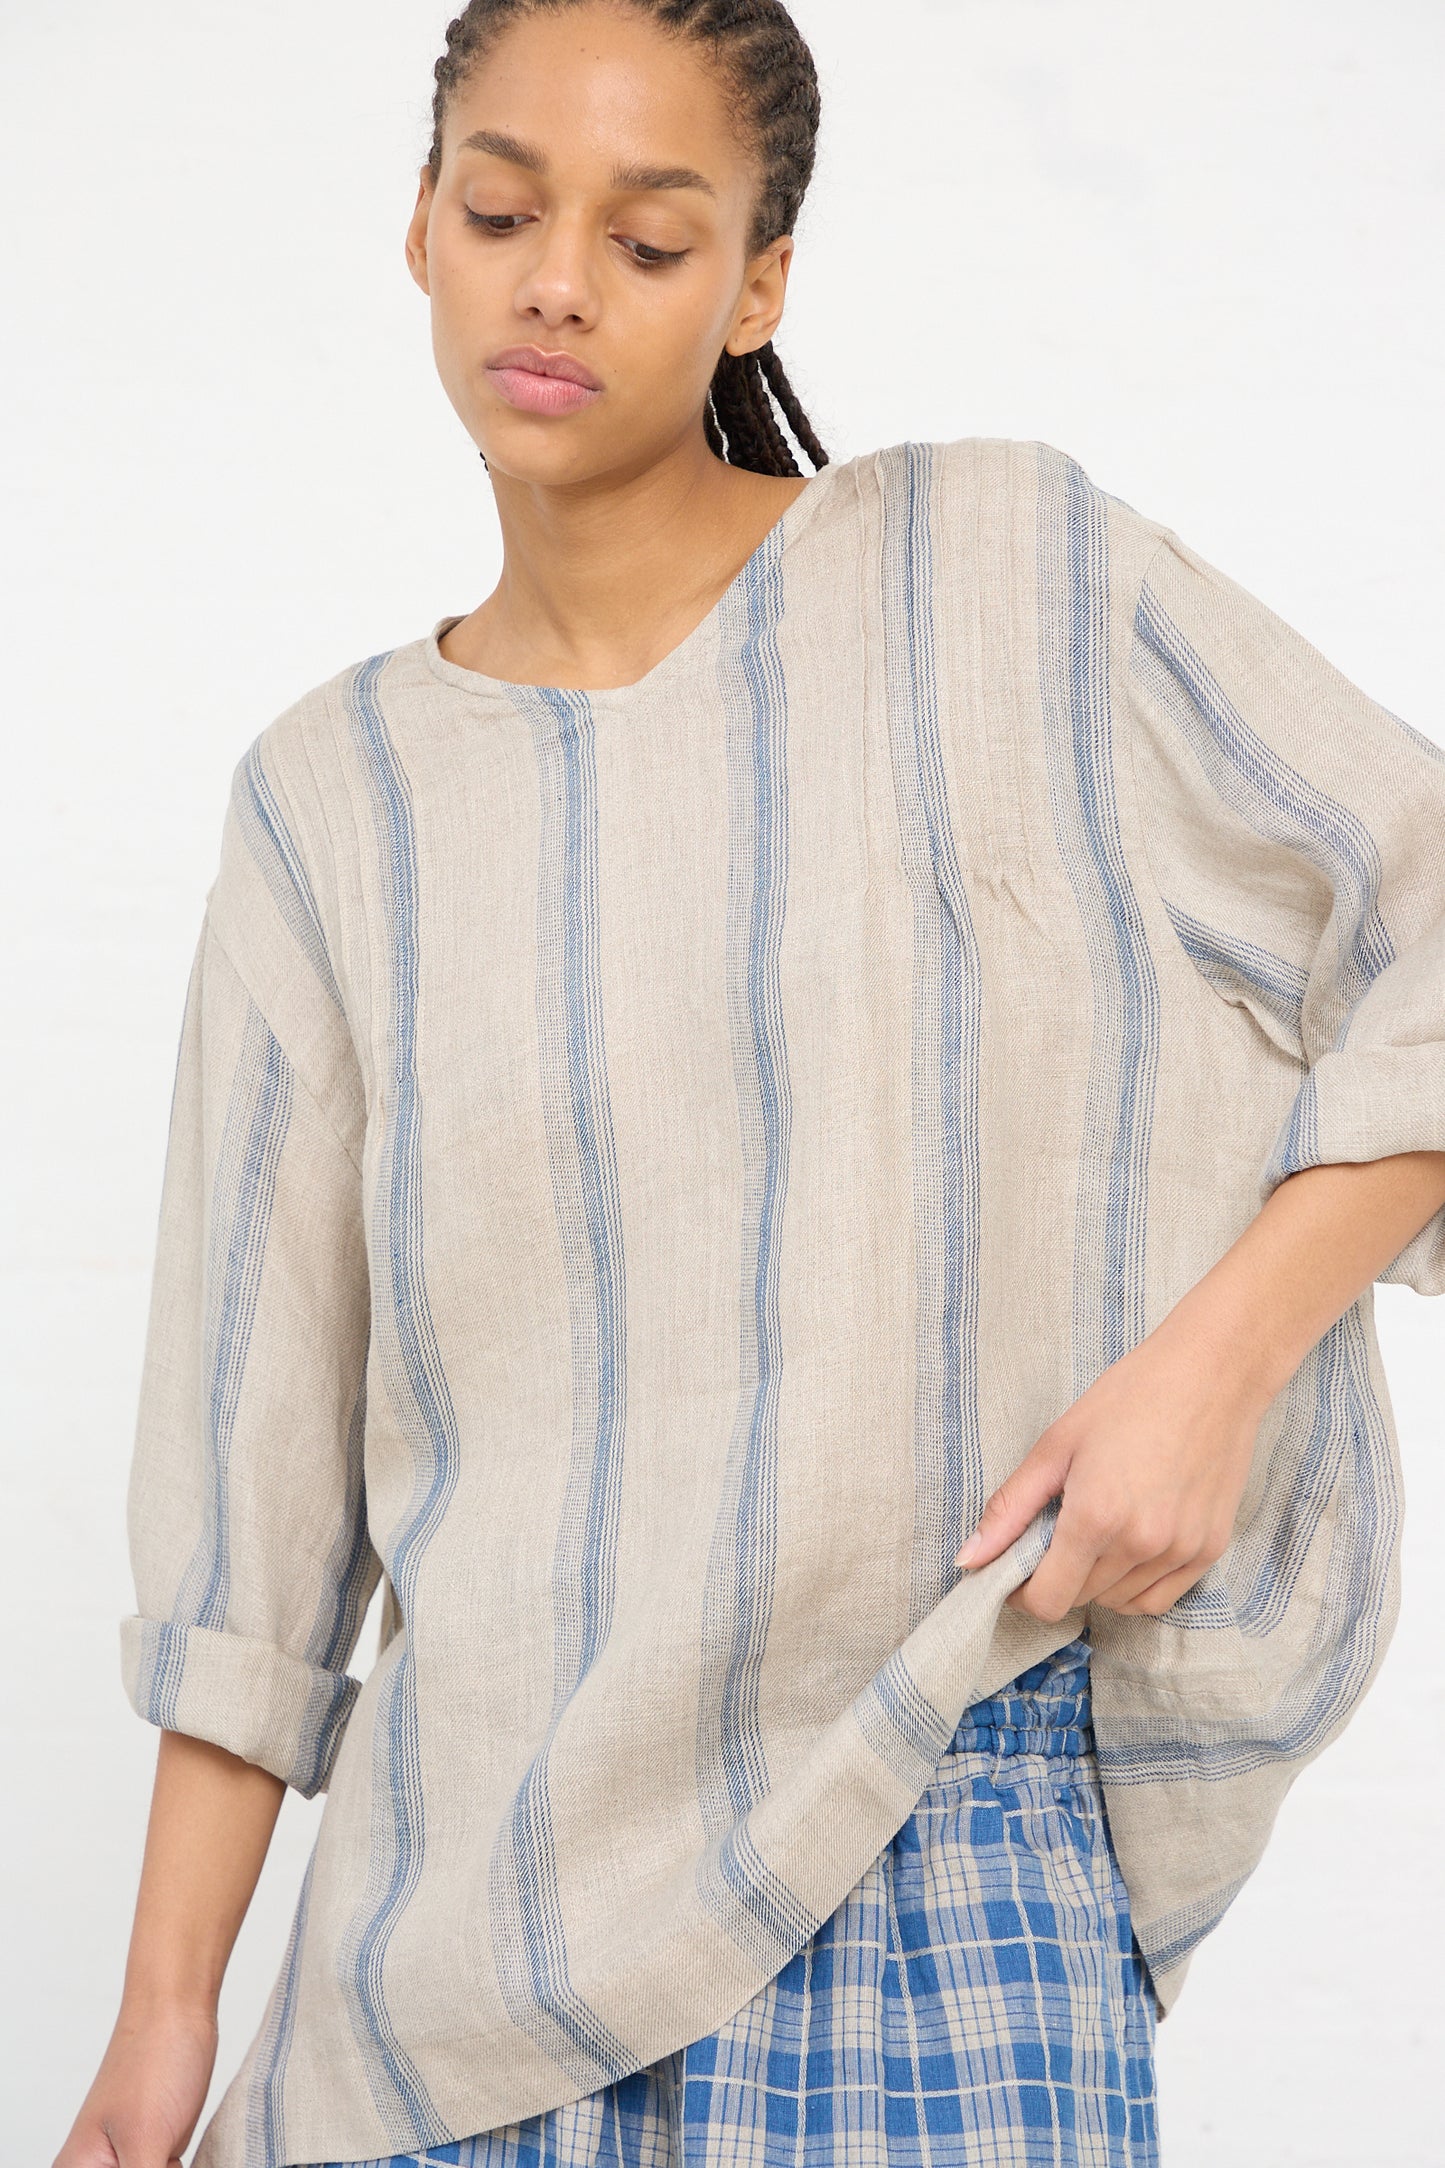 Woman in a Linen Stripe Pullover in Natural and Indigo by Ichi Antiquités standing with one hand in her pocket.